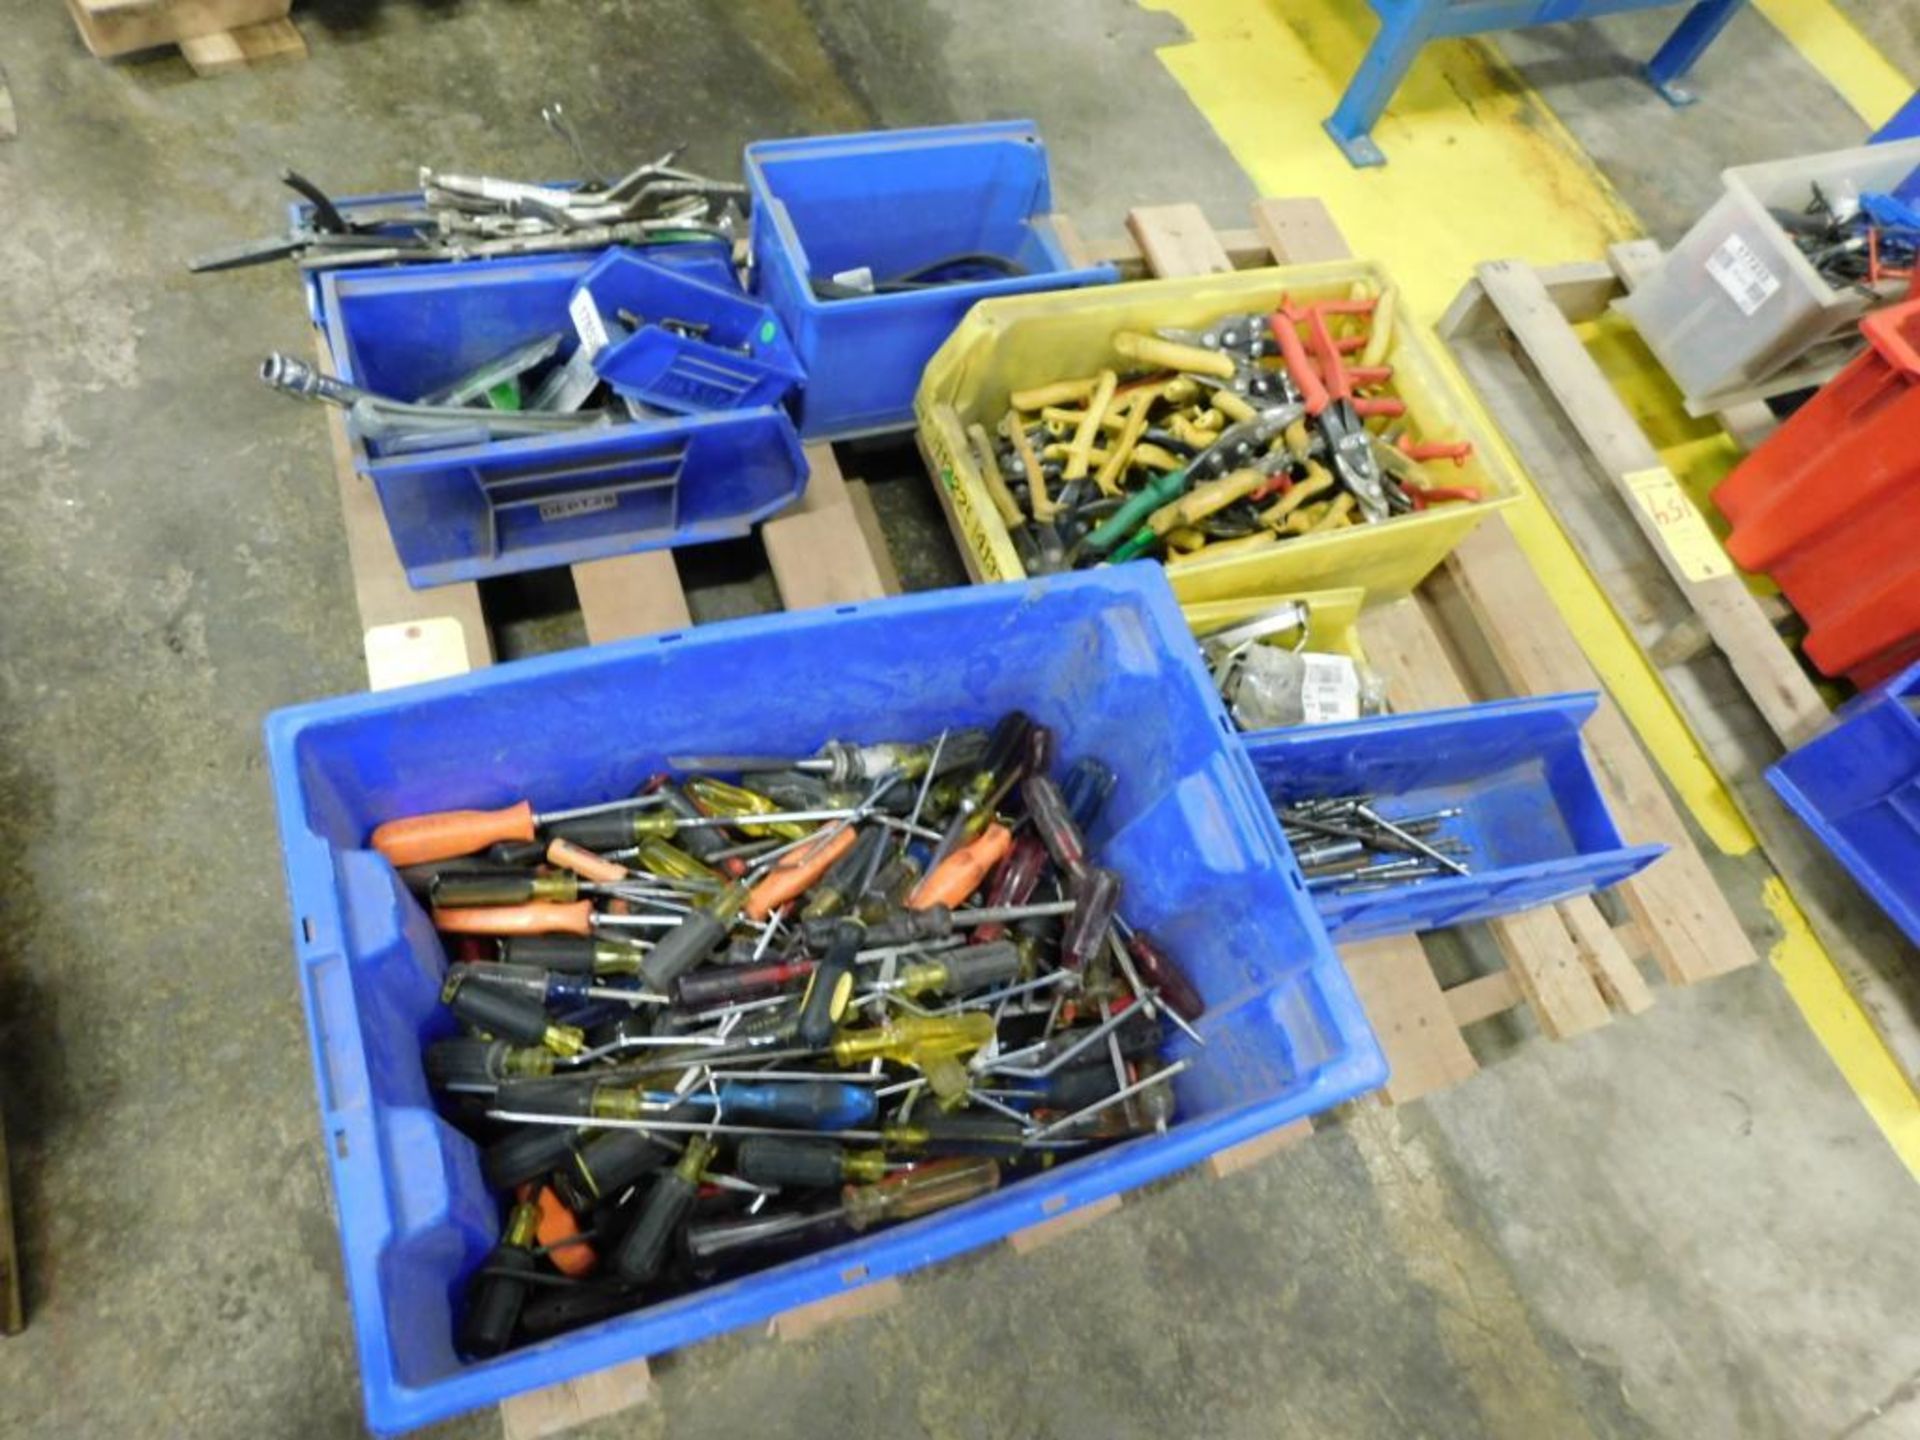 LOT CONSISTING OF: vise grips, screw drivers, tin snips (on one pallet)